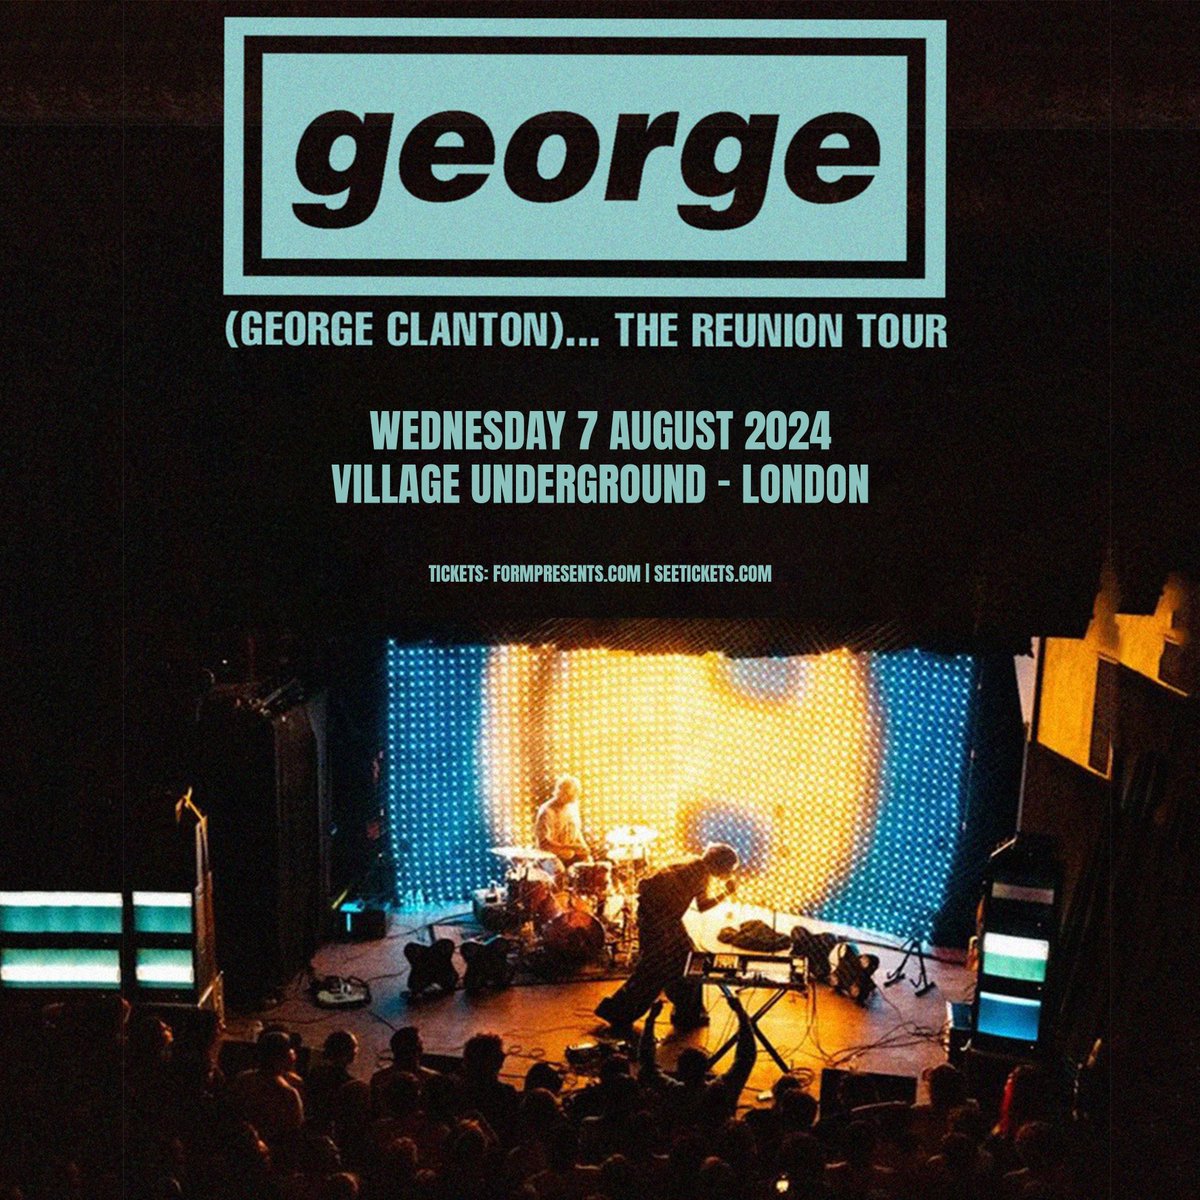 Multi-instrumentalist George Clanton returns with his infectious blend of grunge, acid house, trip hop, shoegaze and vaporwave to London on 7th August at @villageundrgrnd! 🎟 Tickets on sale 10am Friday.